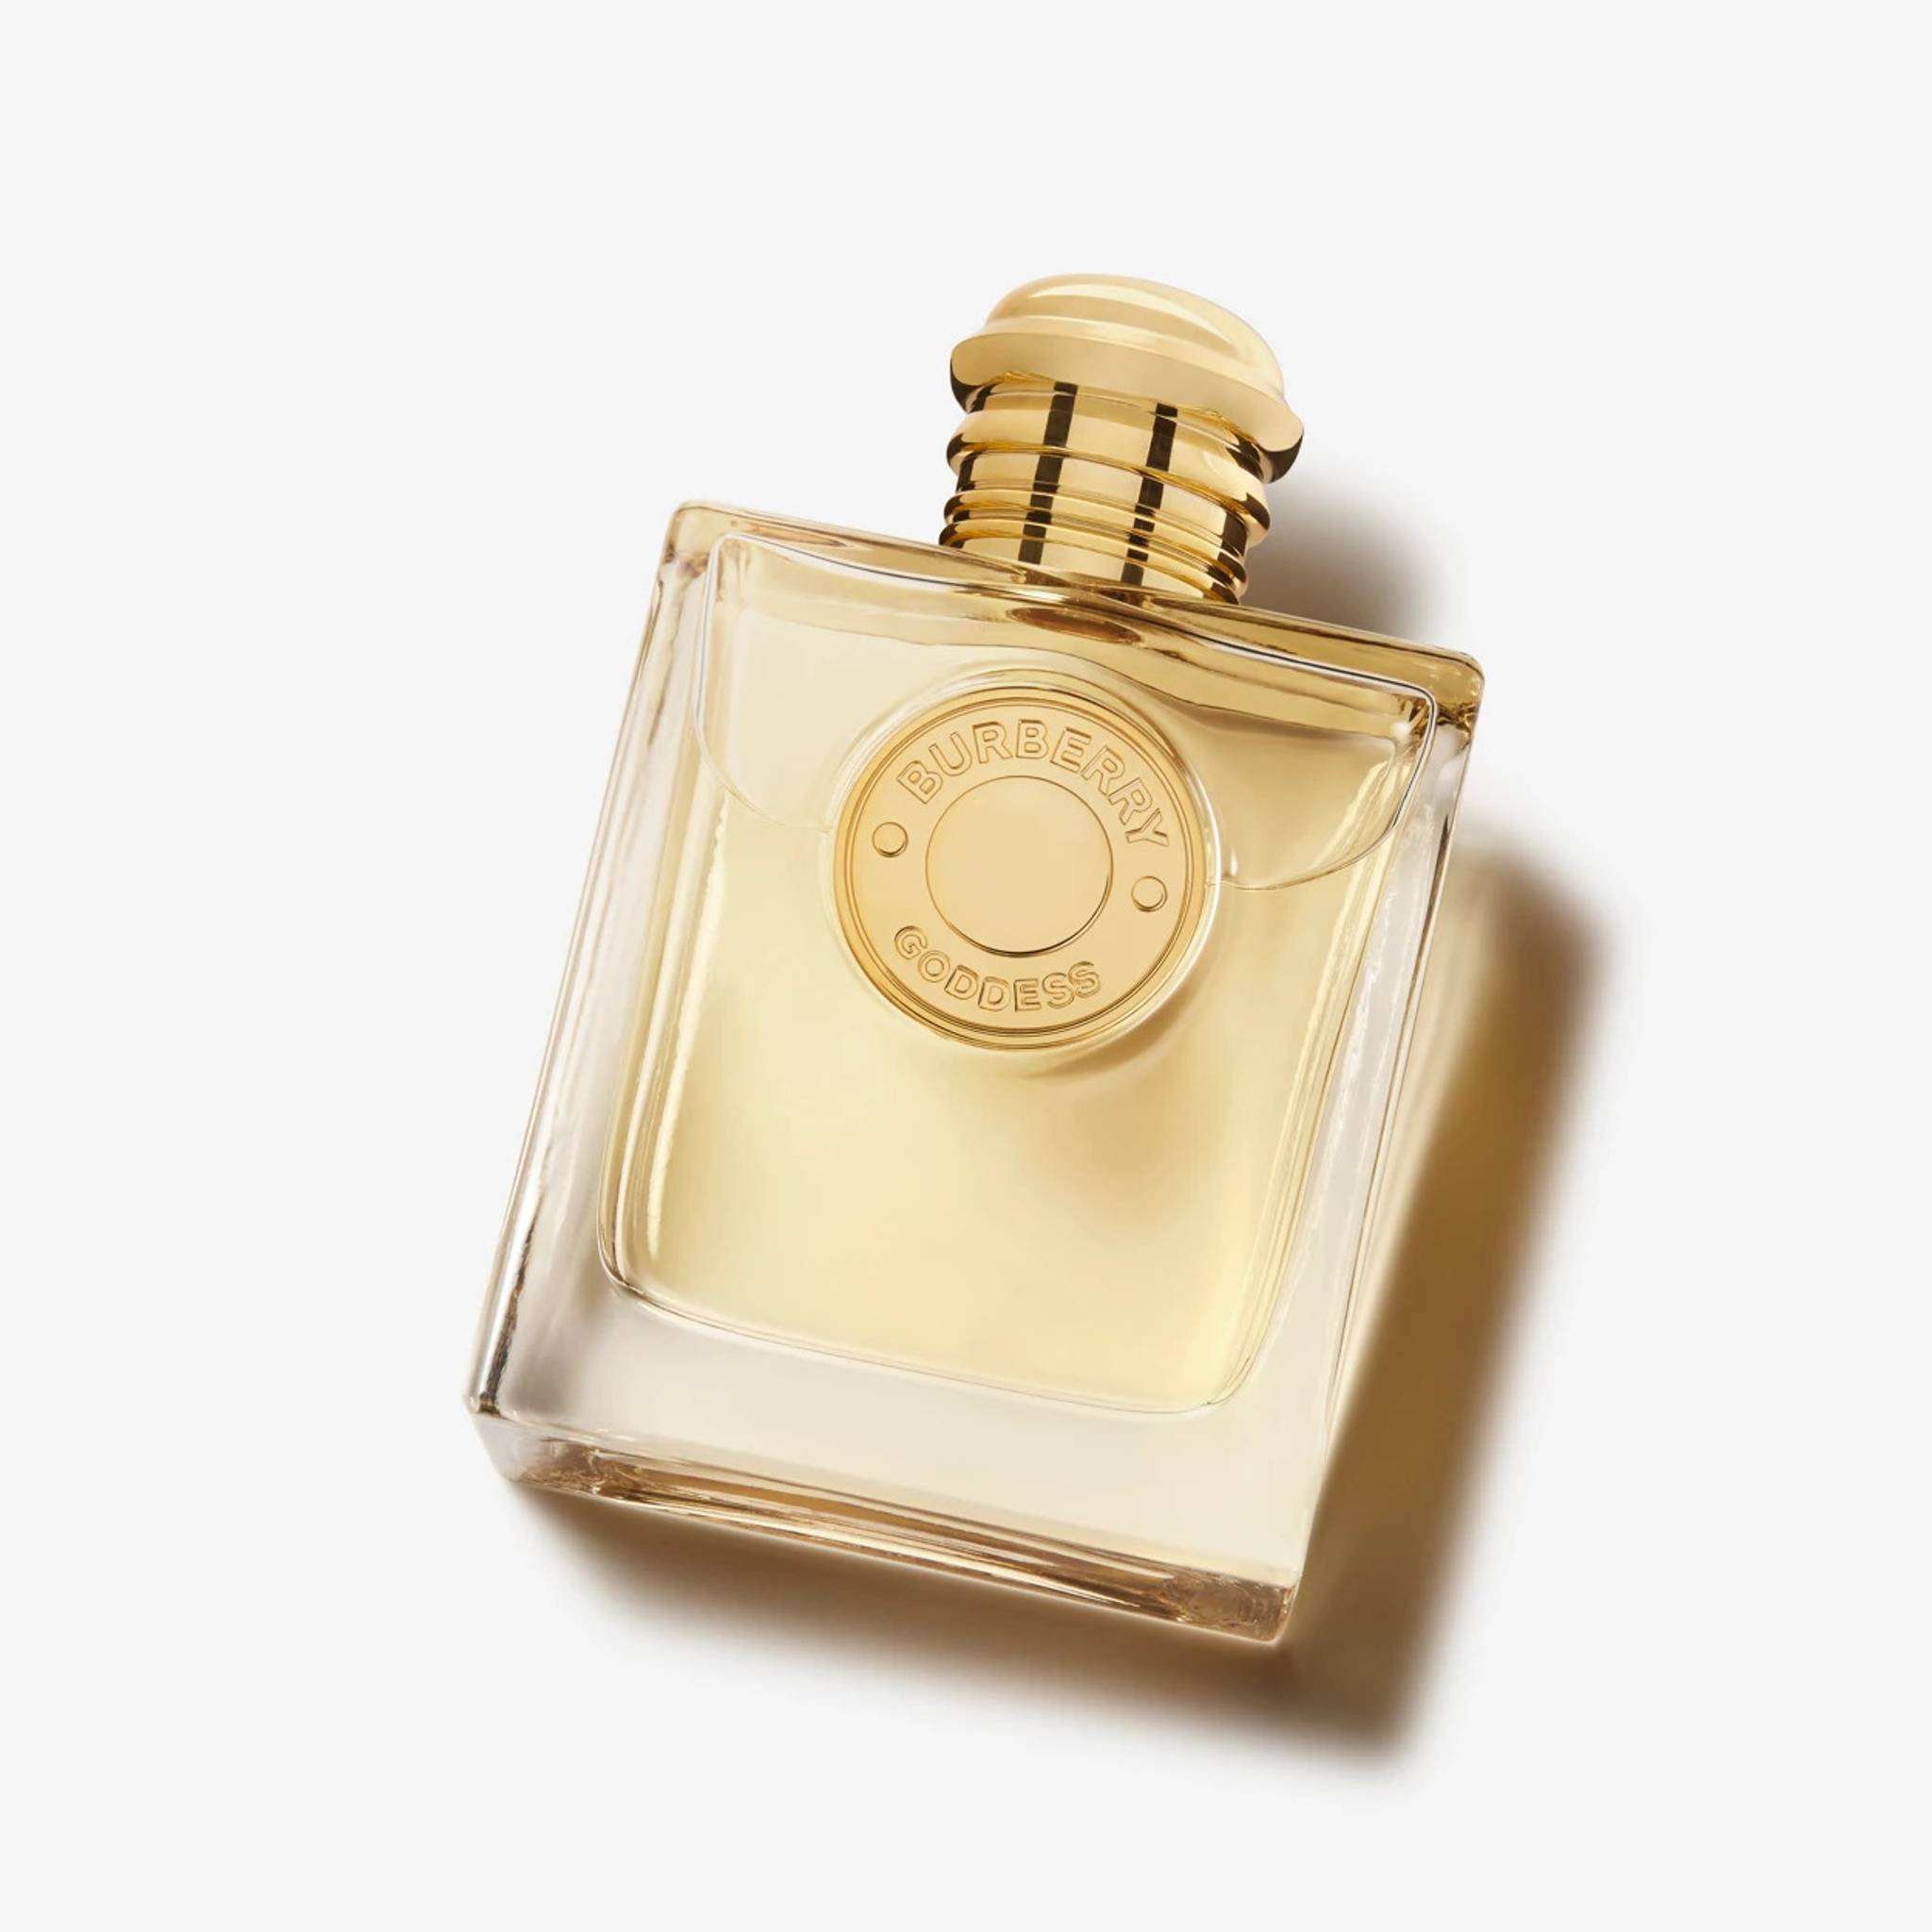 Burberry embraces refillables with 'Goddess' perfume